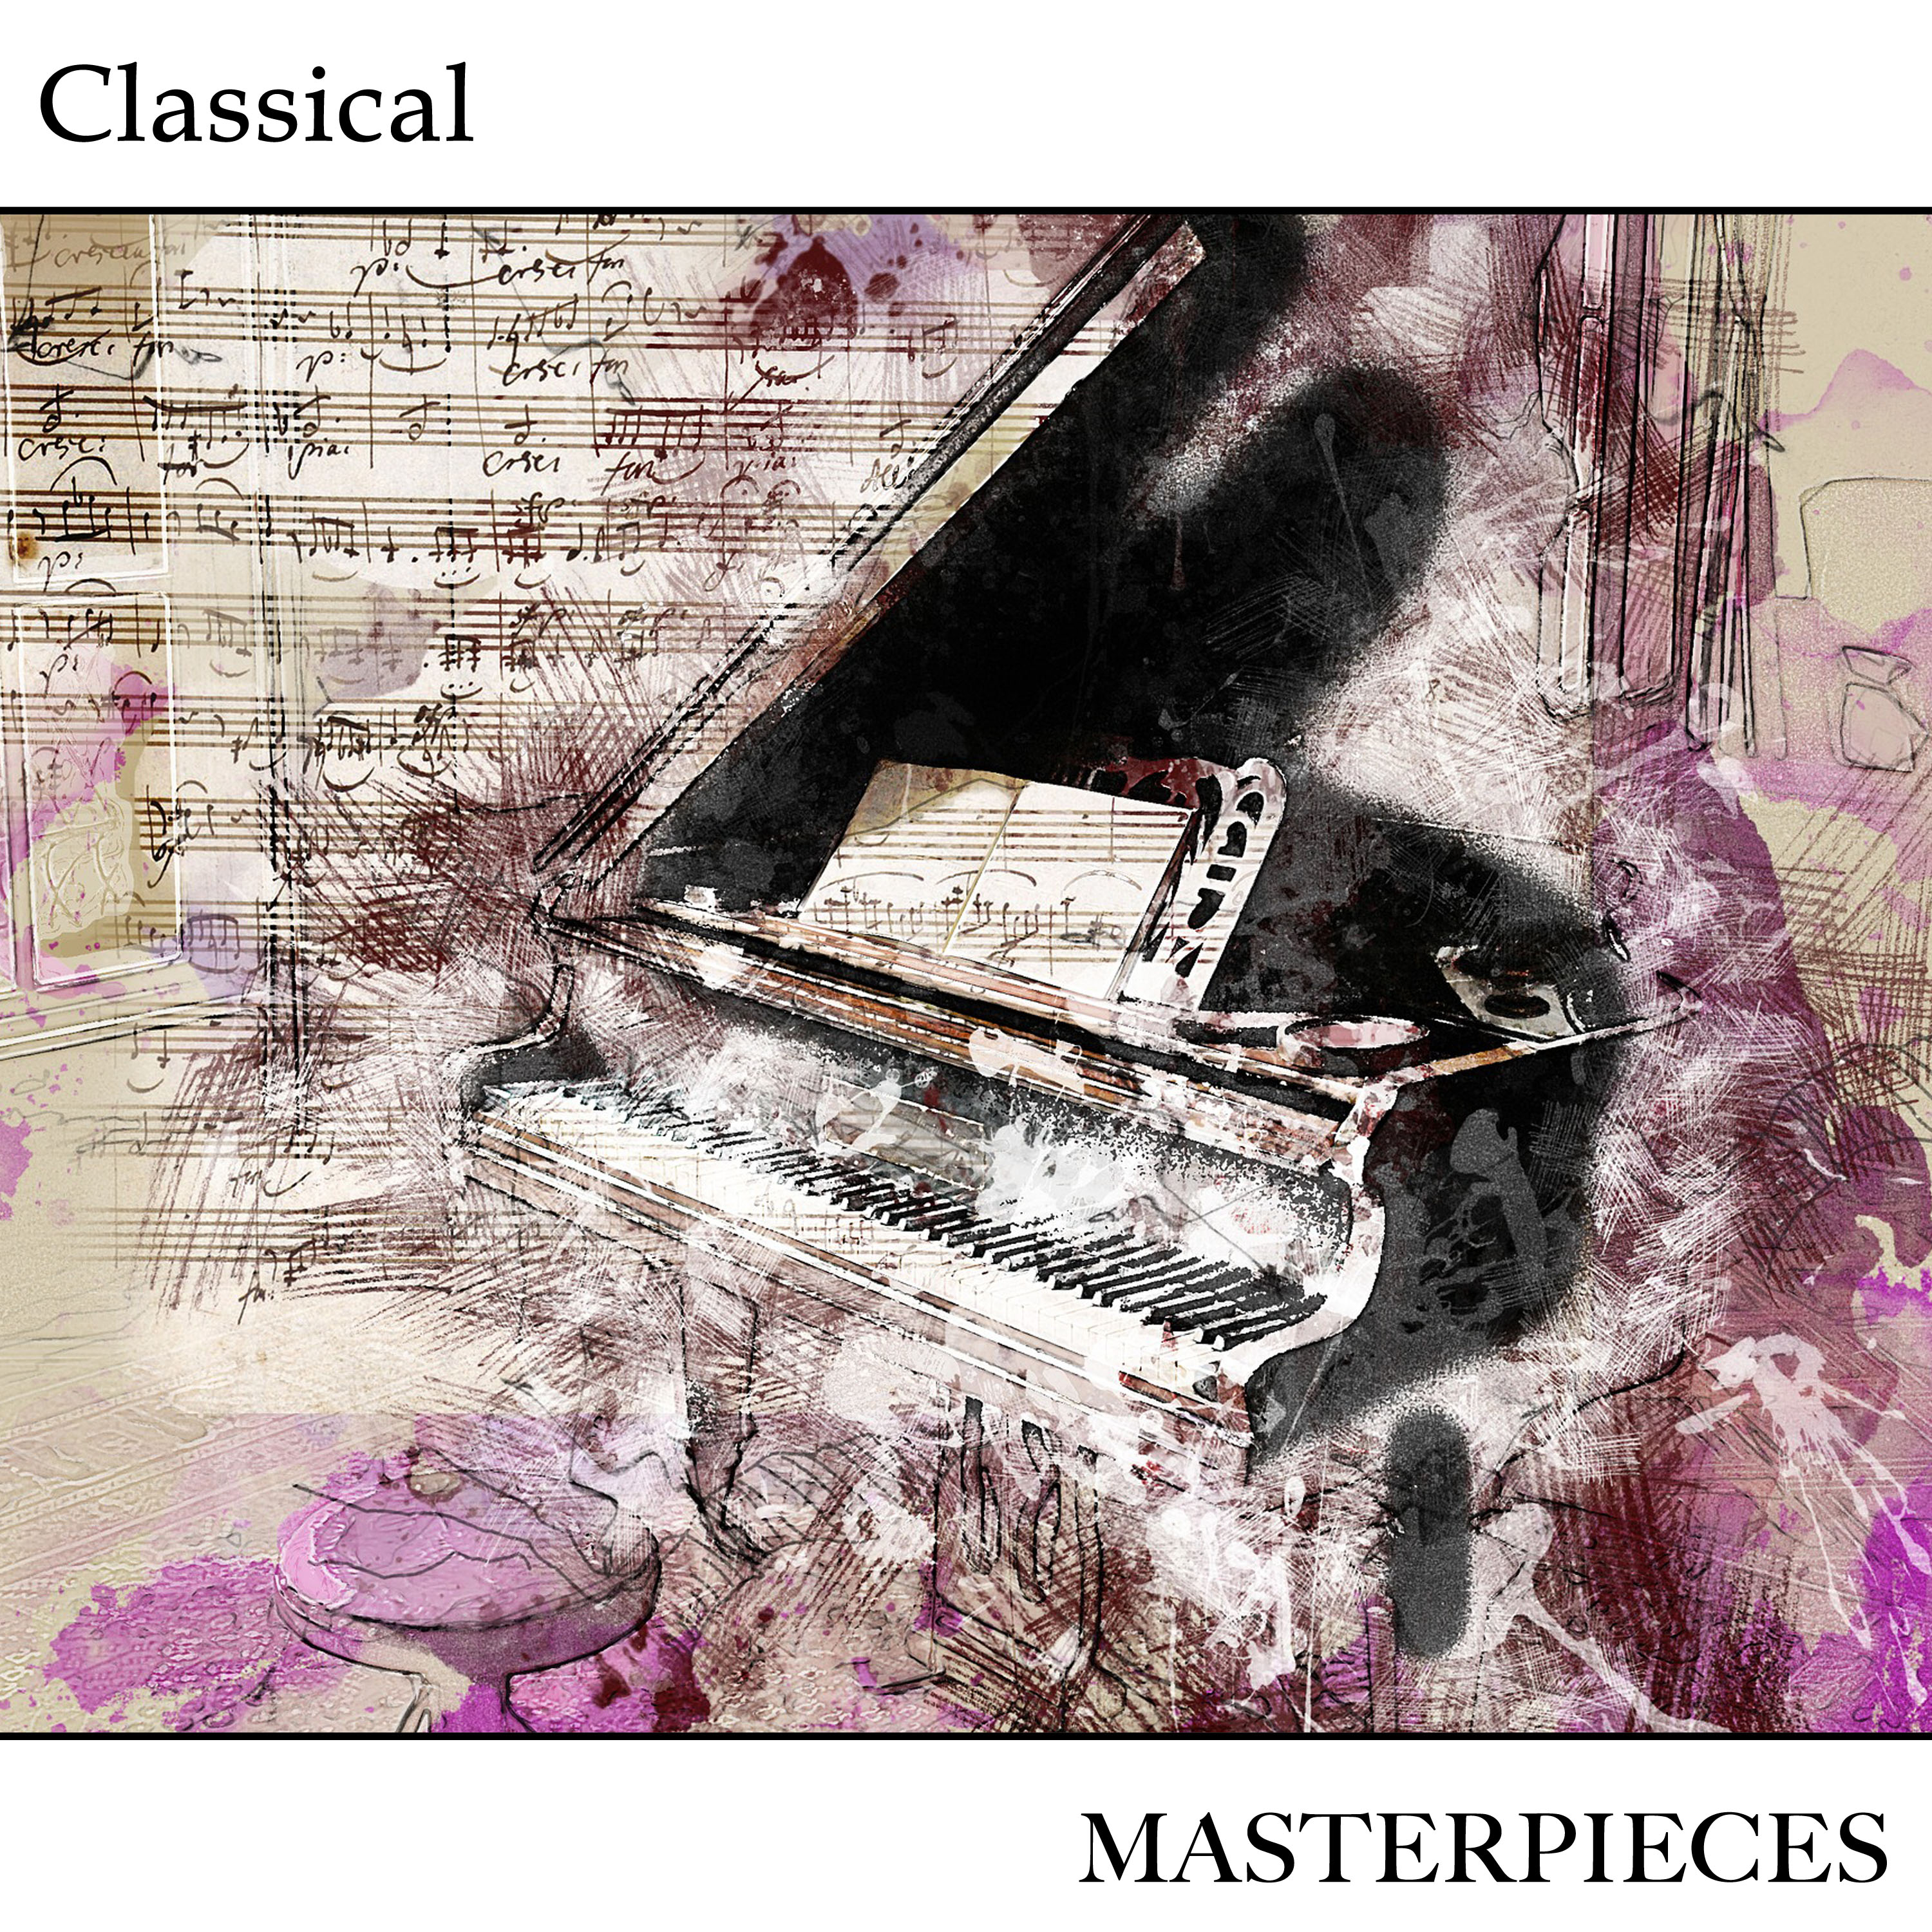 13 Classical Masterpieces to Make Love to